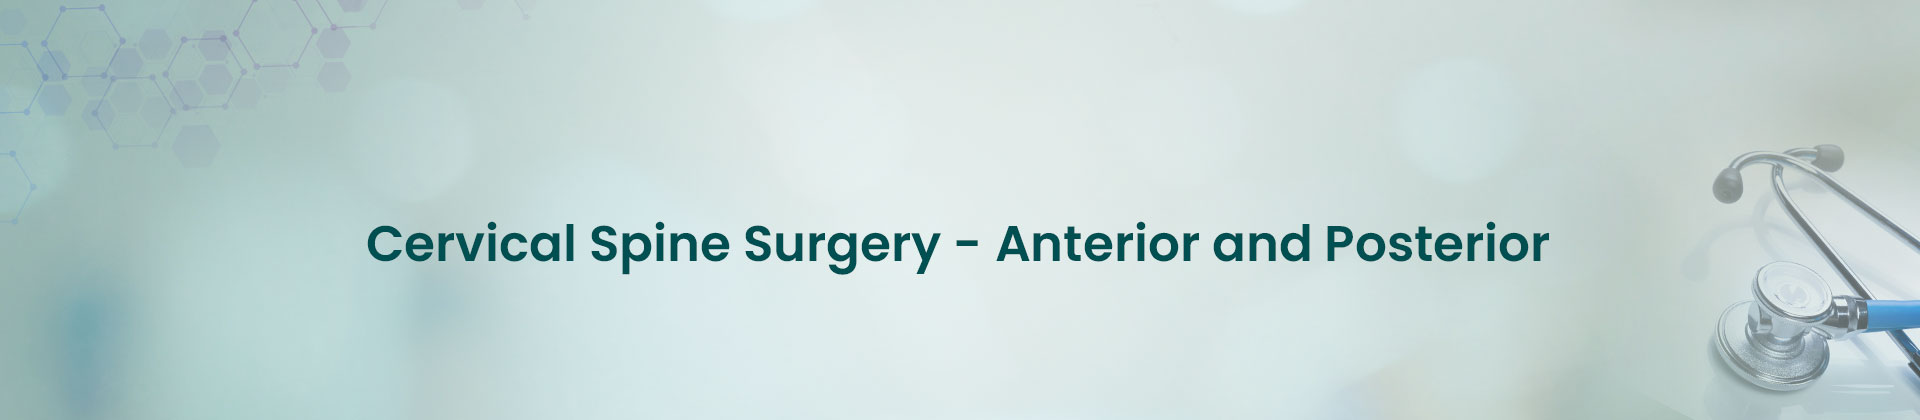 Cervical Spine Surgery- Anterior and Posterior